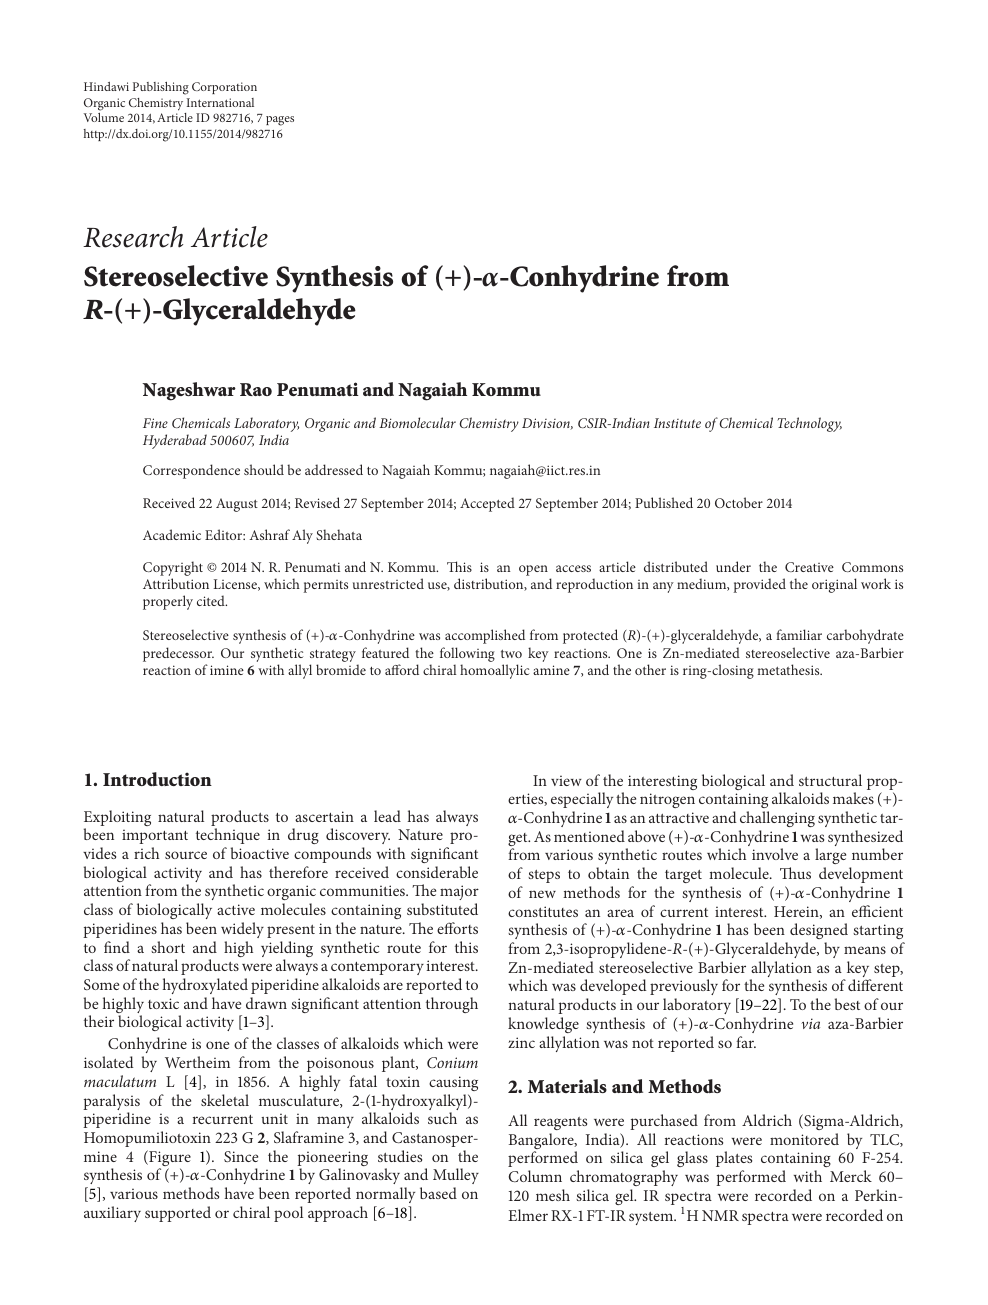 Stereoselective Synthesis Of A Conhydrine From R Glyceraldehyde Topic Of Research Paper In Chemical Sciences Download Scholarly Article Pdf And Read For Free On Cyberleninka Open Science Hub